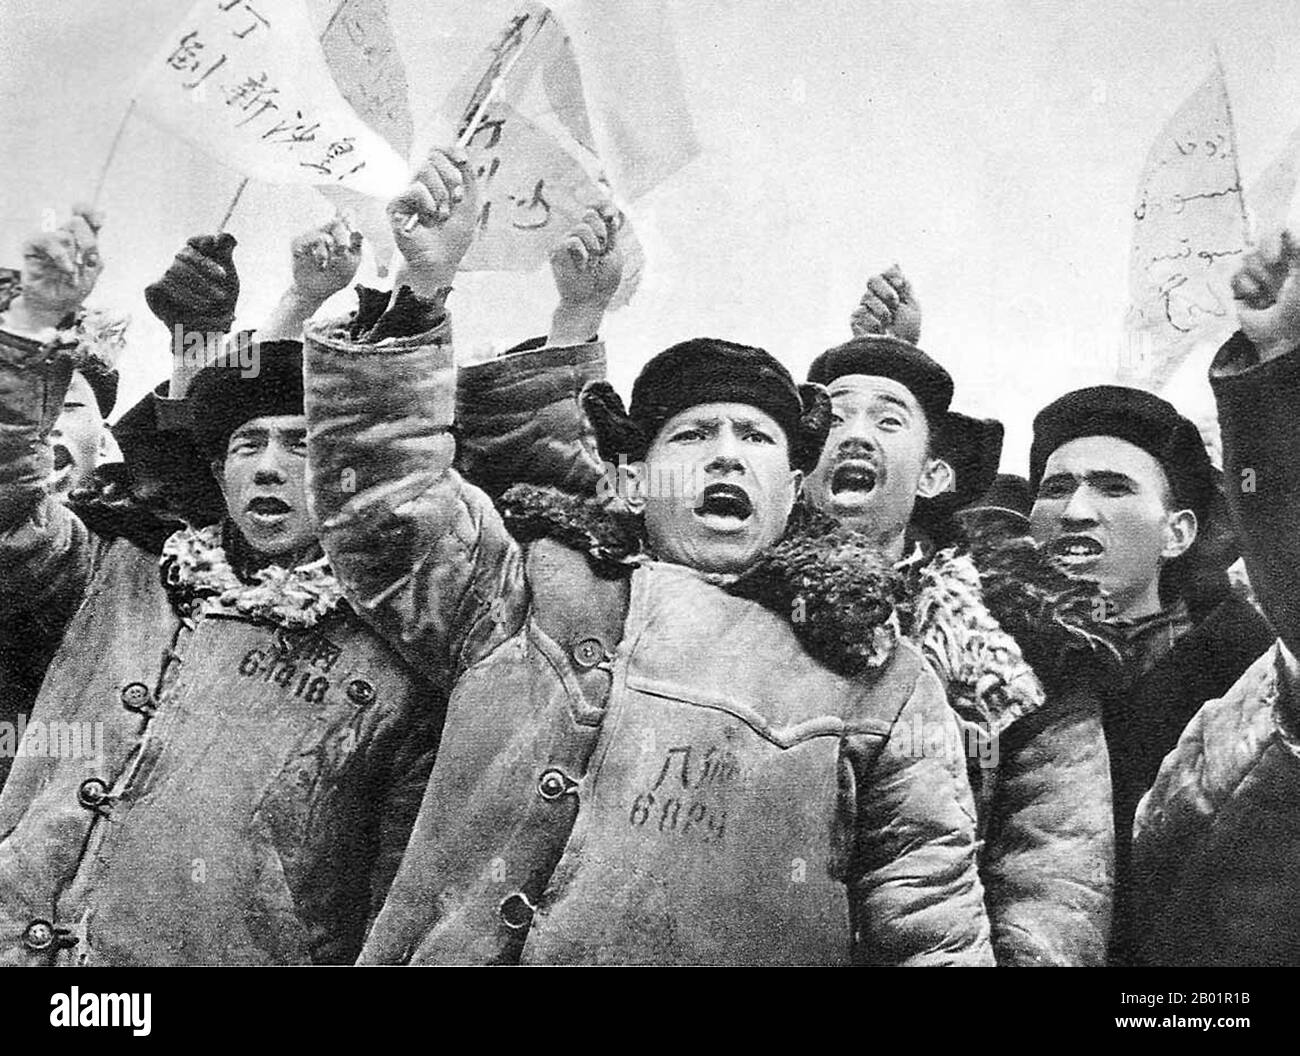 China: Two hundred thousand soldiers and civilians denounce the Soviet revisionist renegade clique in Urumchi, 1969.  Down with the New Tsars!: Soviet Revisionists’ Anti-China Atrocities on the Heilung and Wusuli Rivers.  By March 1969, Sino-Russian border rivalries led to the Sino-Soviet border conflict at the Ussuri River and on Damansky-Zhenbao Island; more small-scale warfare occurred at Tielieketi in August. Stock Photo